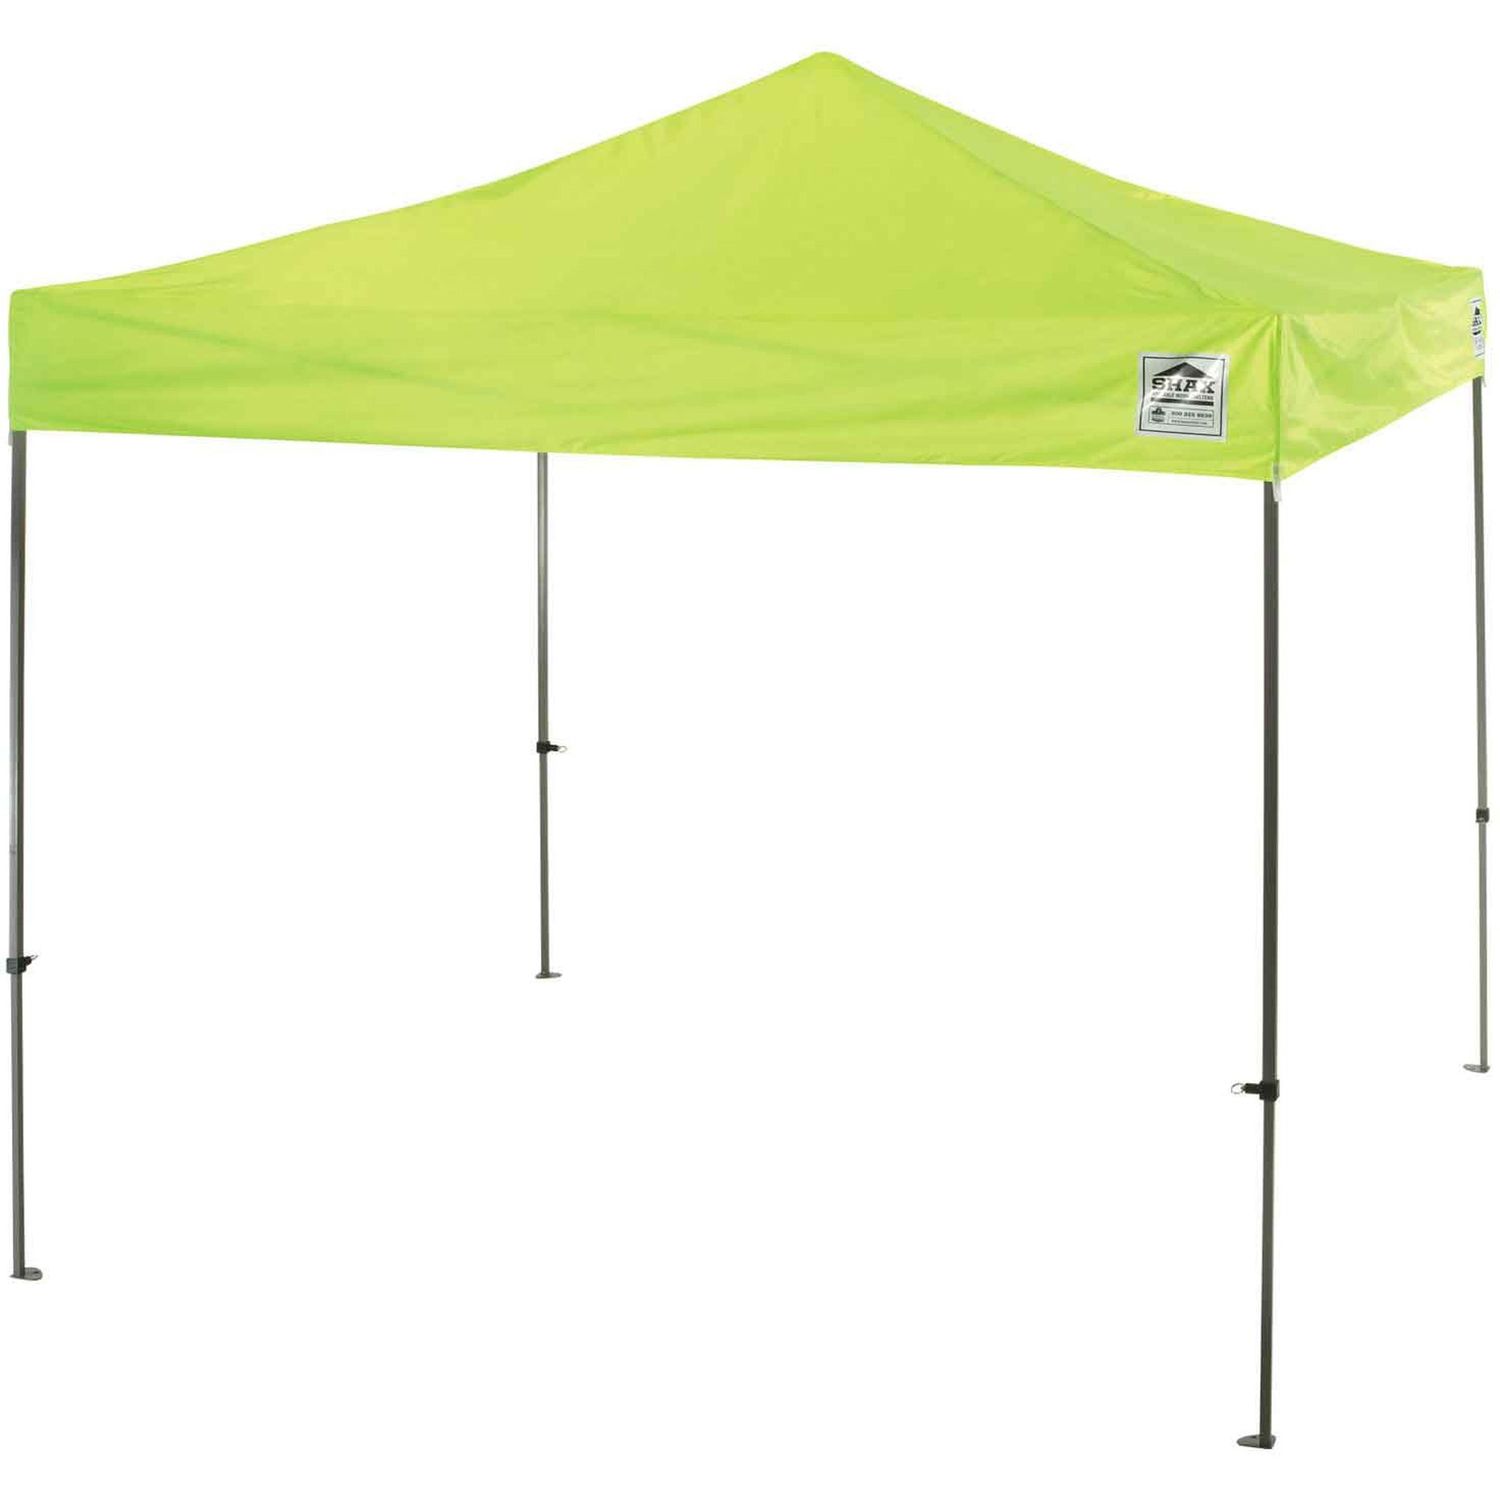 Instant Shelter Canopy Canopy StyleLime, Polyester, Polyurethane, Steel Frame